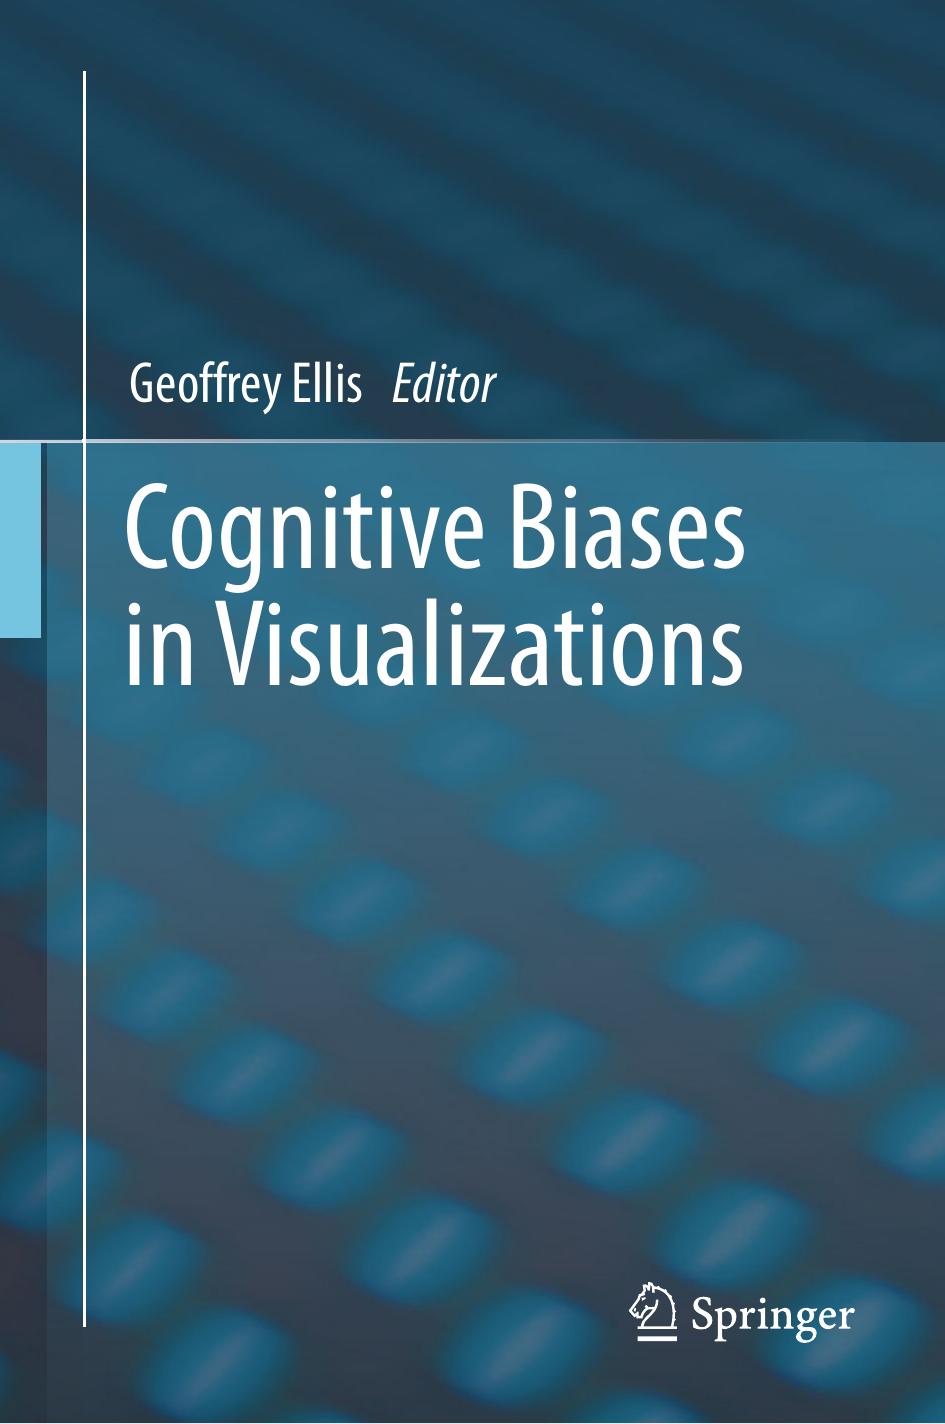 Cognitive Biases in Visualizations